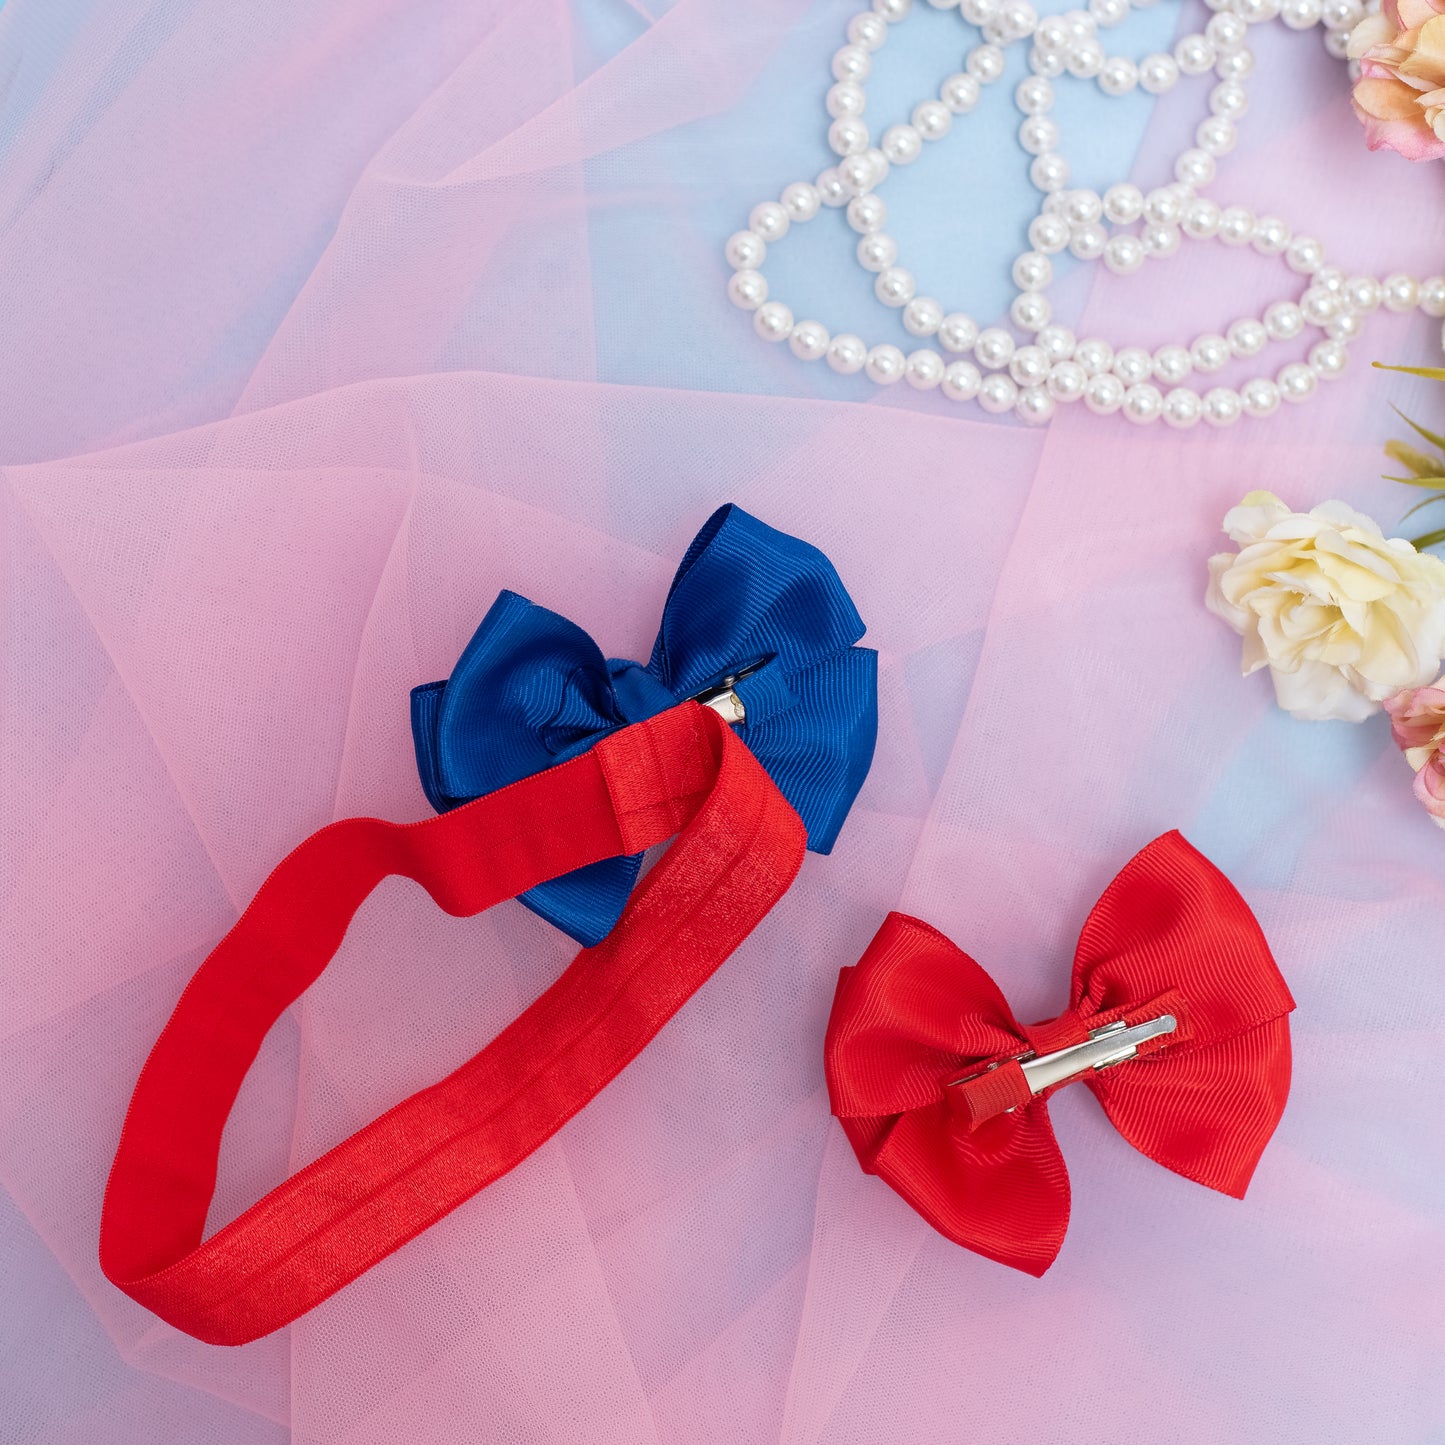 Combo: 1 Stretchy Band with 2 Layered Bows embellished with Sequinze and Pearls - Red, Blue (Set of 1 strechy band, 2 Large Layered Bo